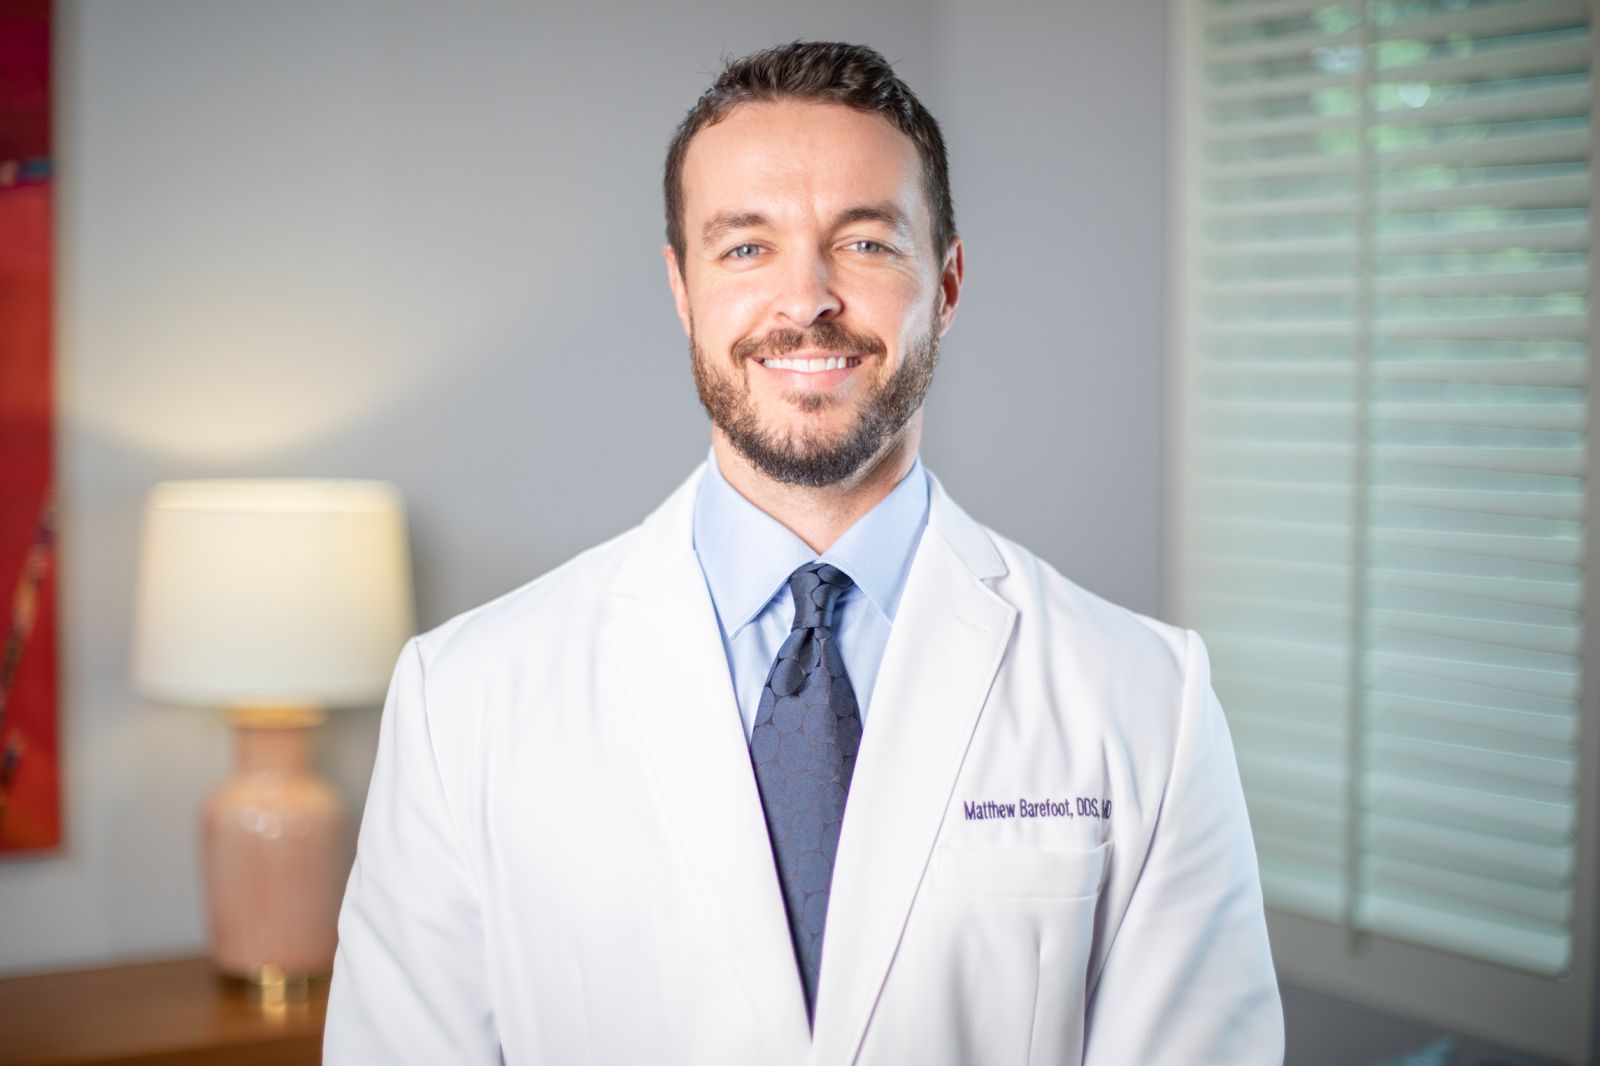 Dr. Matthew Barefoot is an oral surgeon in Mount Pleasant. (Photo/Provided)